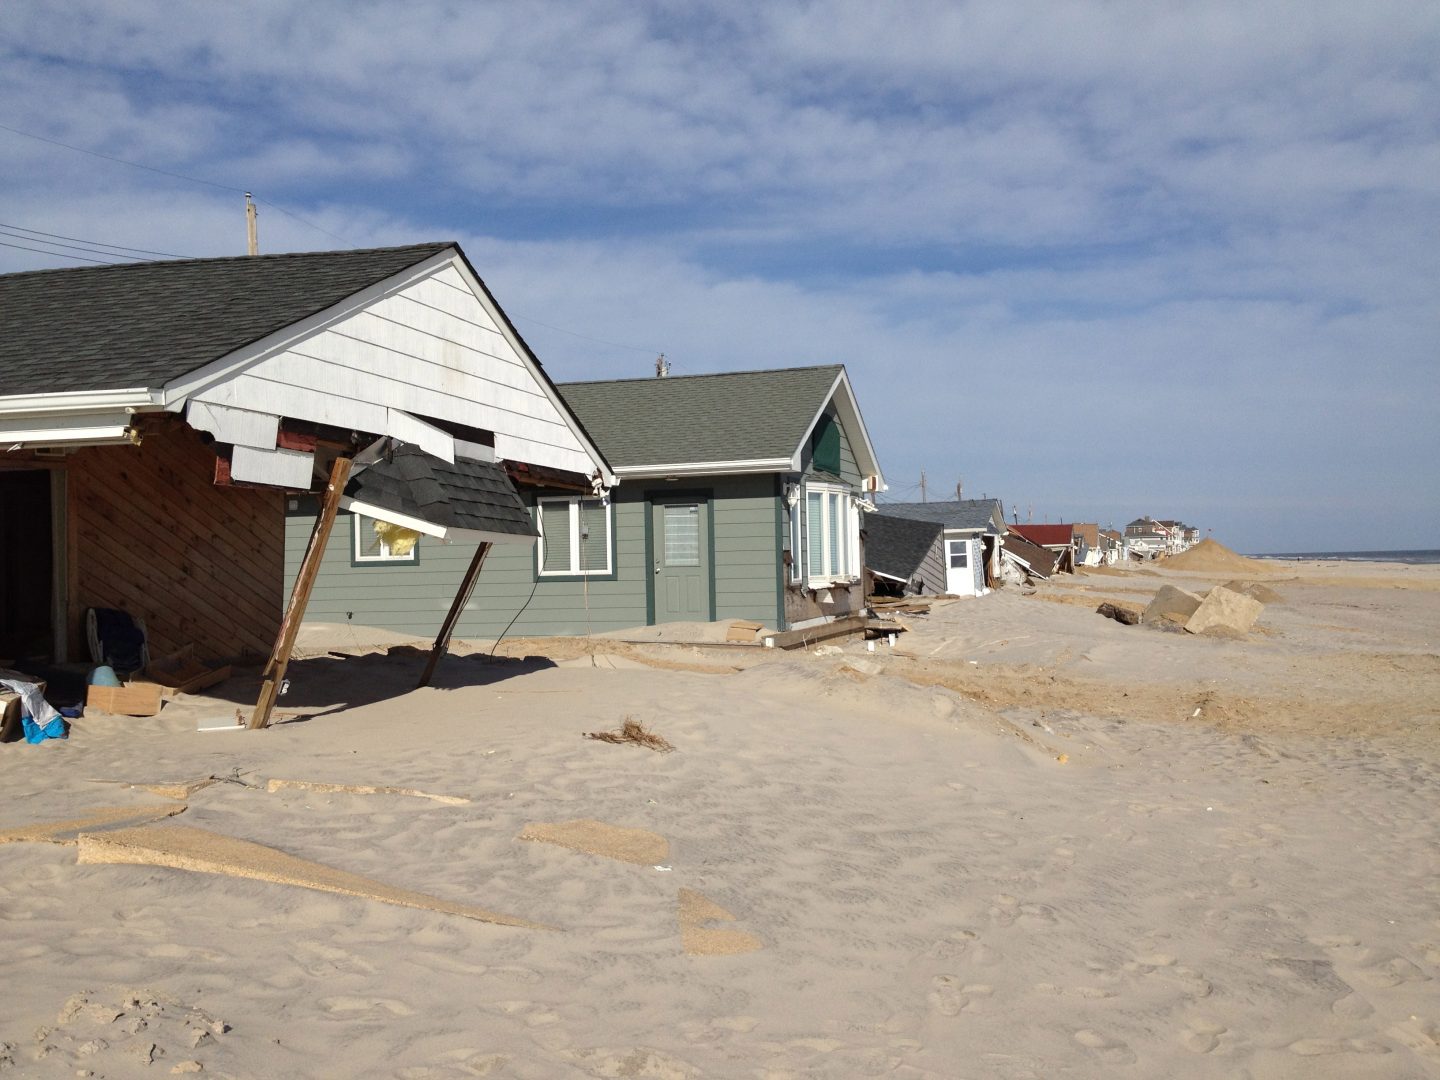 Homes damaged along the New Jersey Shore after Hurricane Sandy in 2012. (b0jangles via Flickr Creative Commons: https://bit.ly/1mhaR6e)